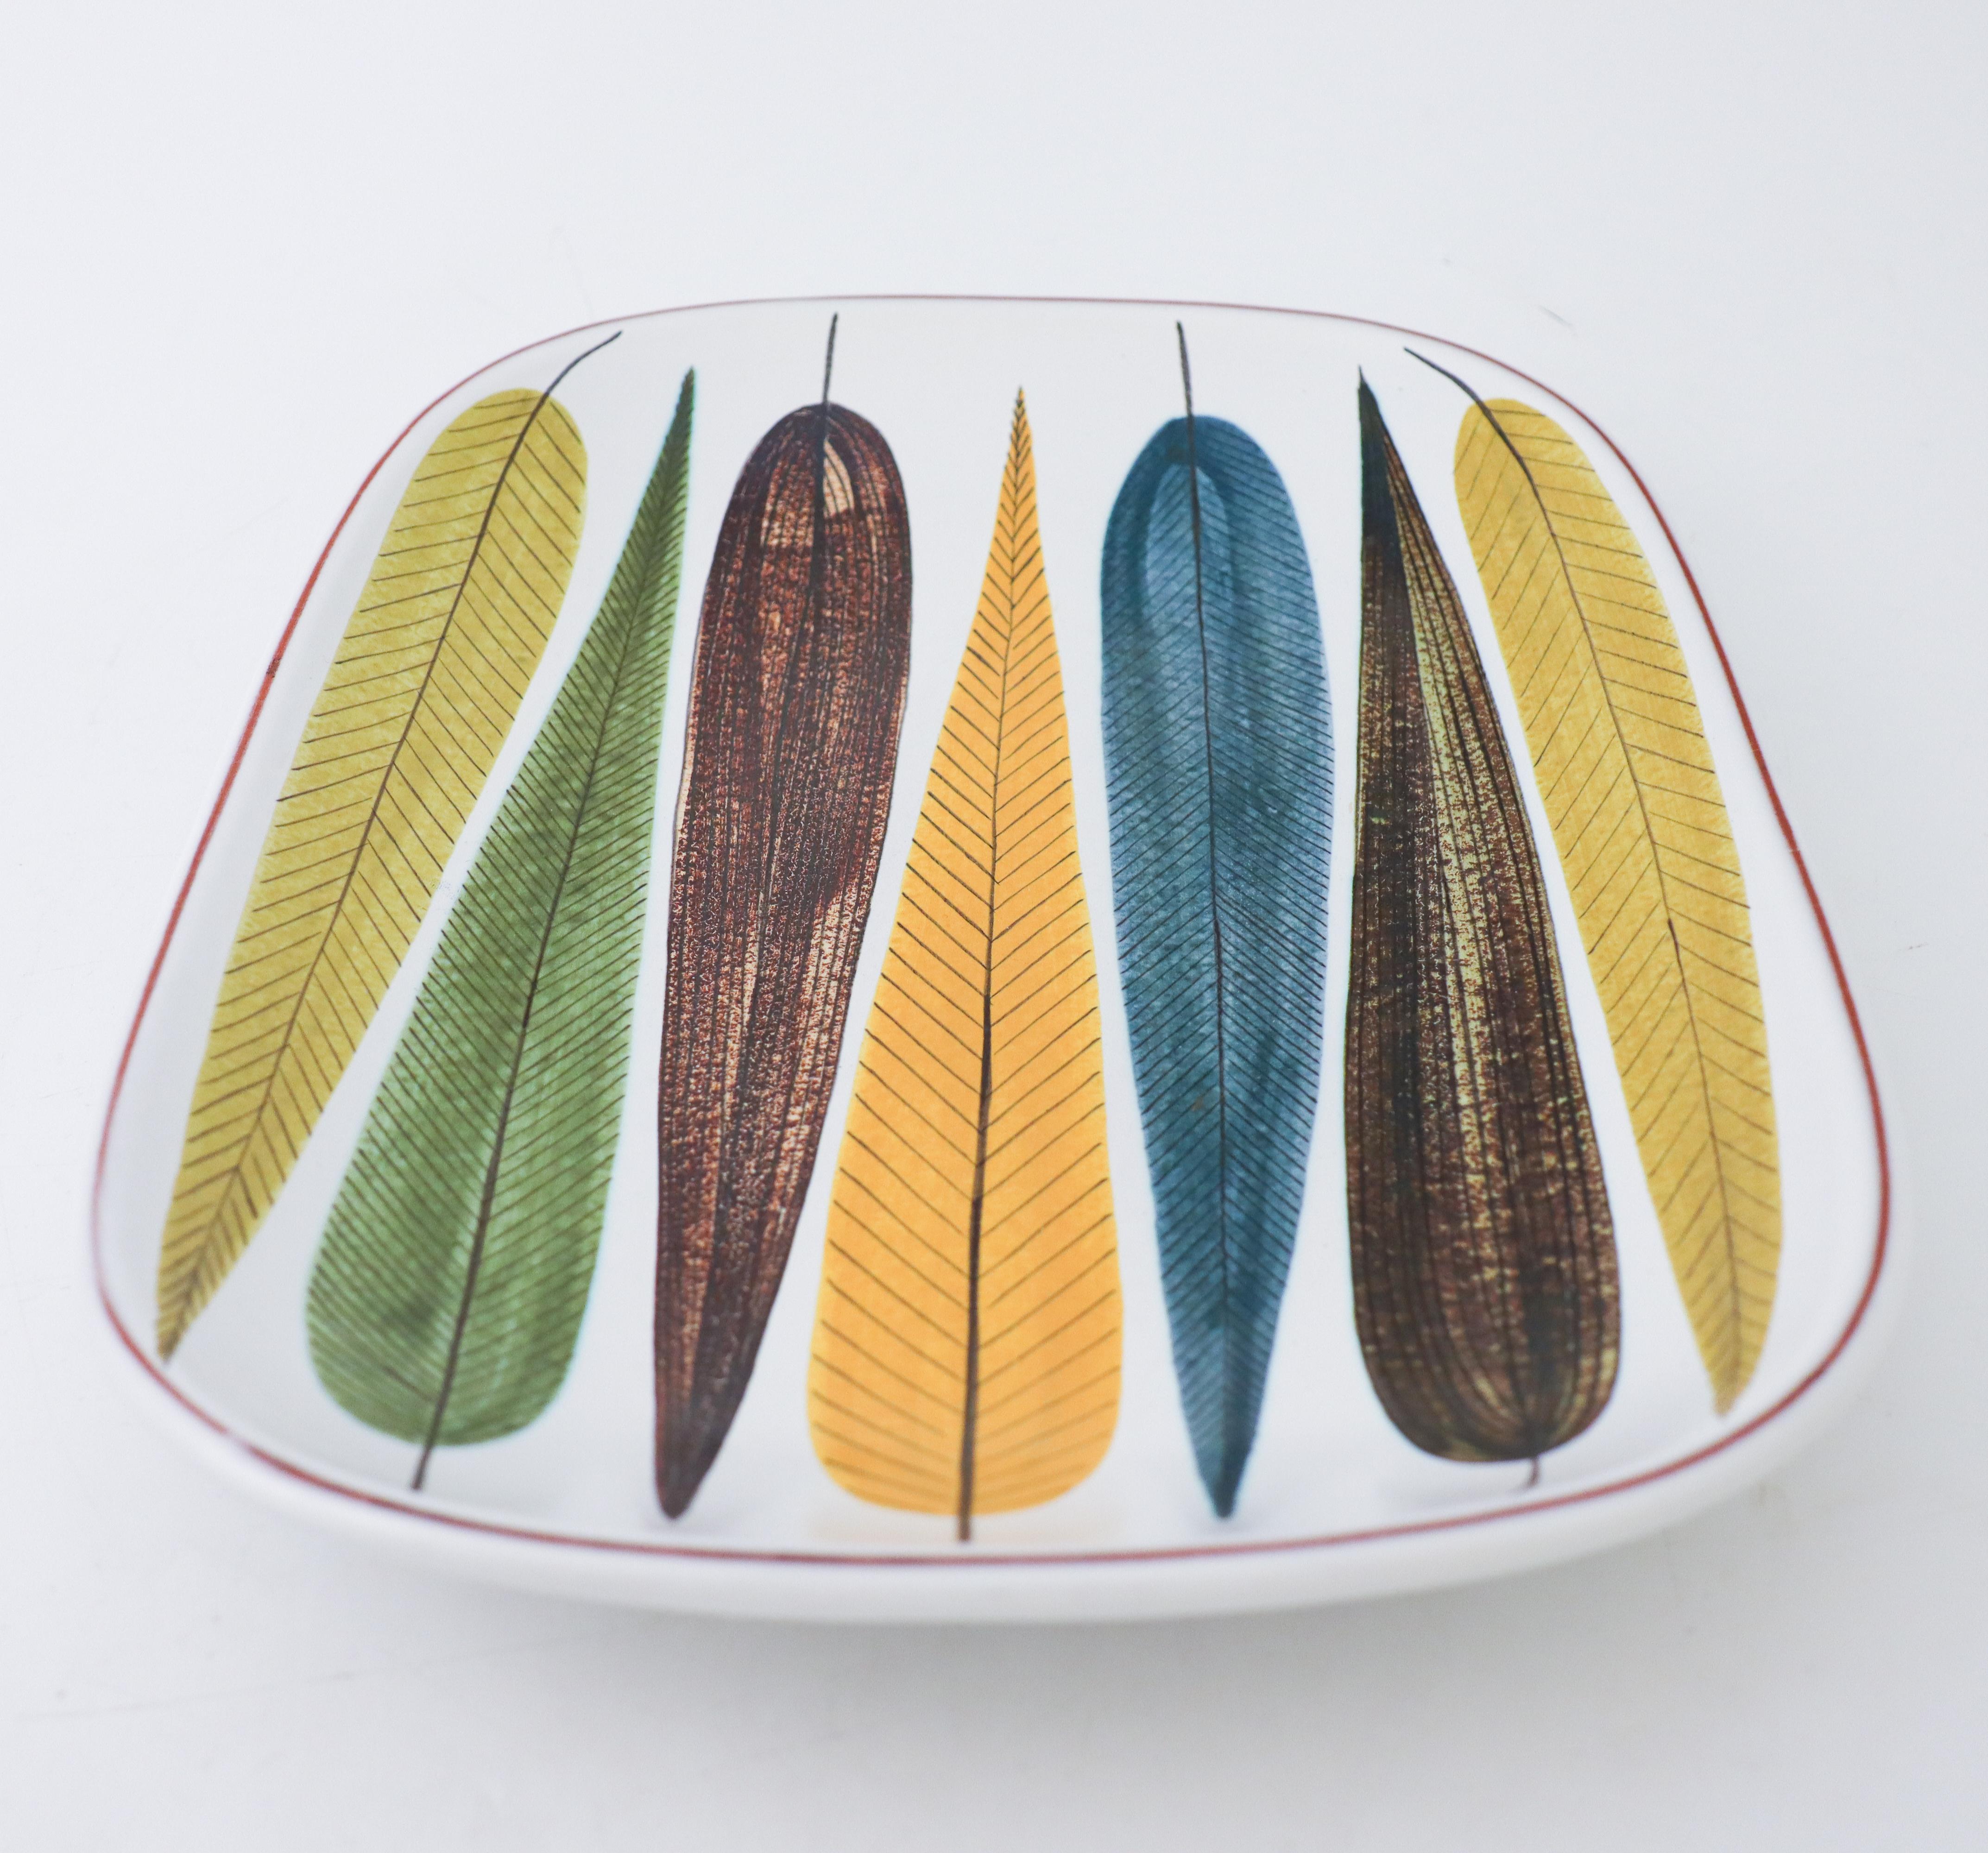 A large dish in faience designed by Stig Lindberg at Gustavsberg Studio with a lovely decor of leafs, it´s 32.5 x 25 cm (12.8